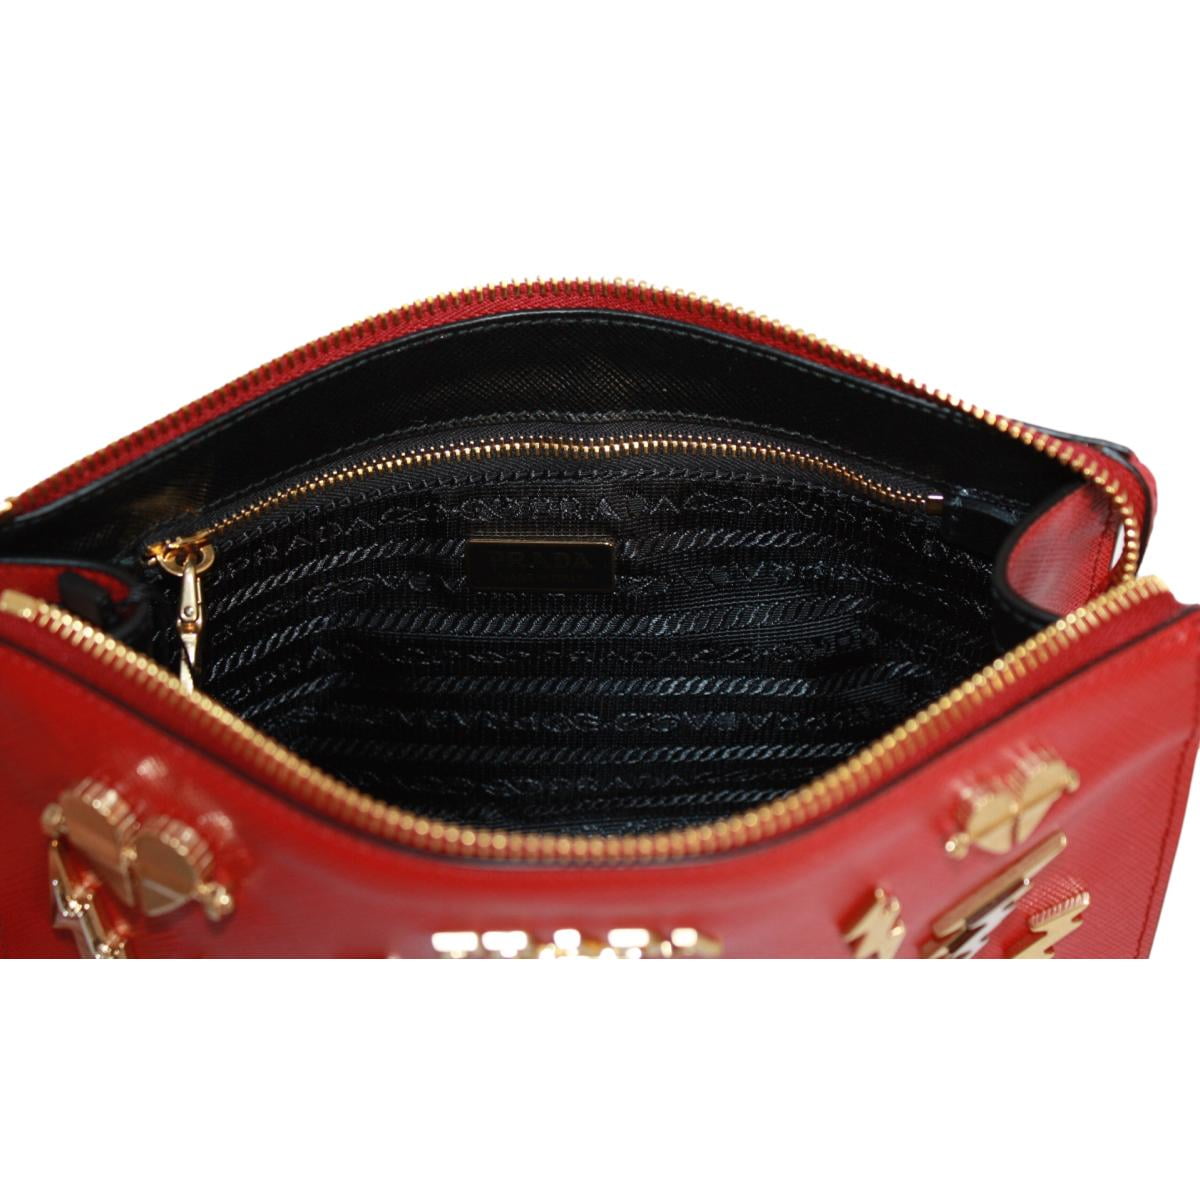 Prada Fuoco Red Saffiano Leather Gold Hearts Pouch Wristlet Clutch Bag –  Queen Bee of Beverly Hills